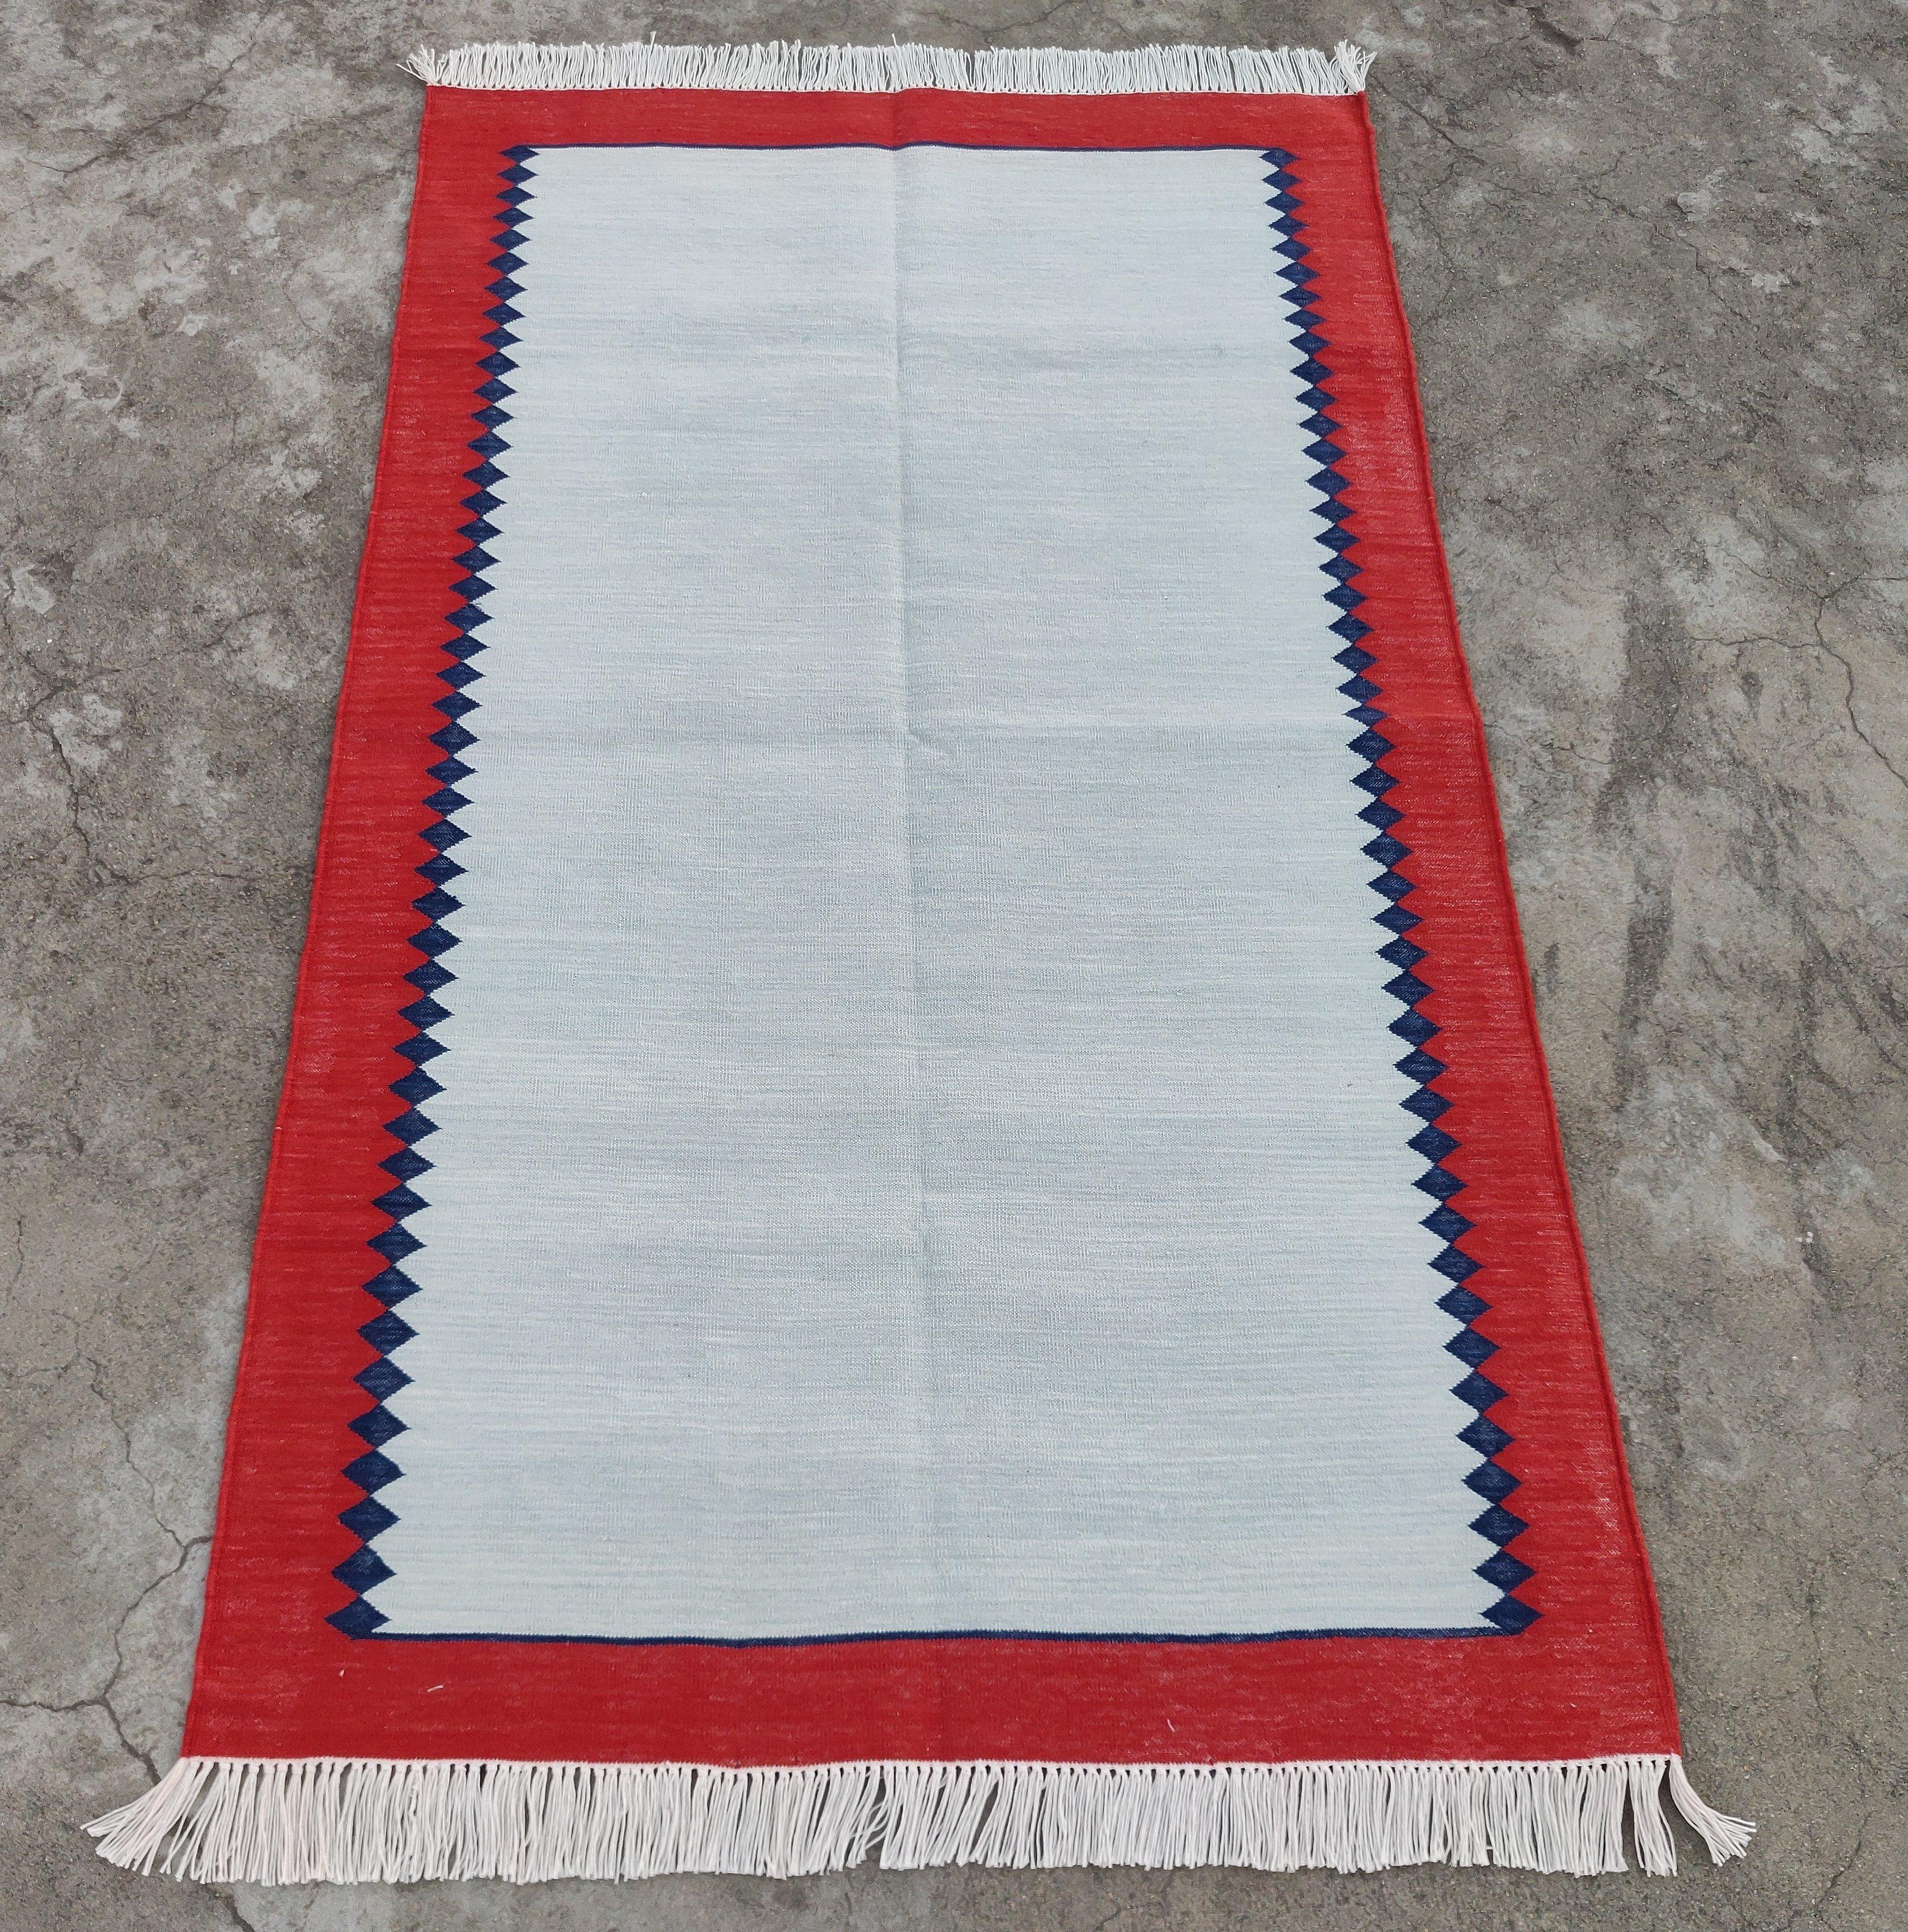 Hand-Woven Handmade Cotton Area Flat Weave Rug, 3'x5' Blue And Red Striped Indian Dhurrie For Sale